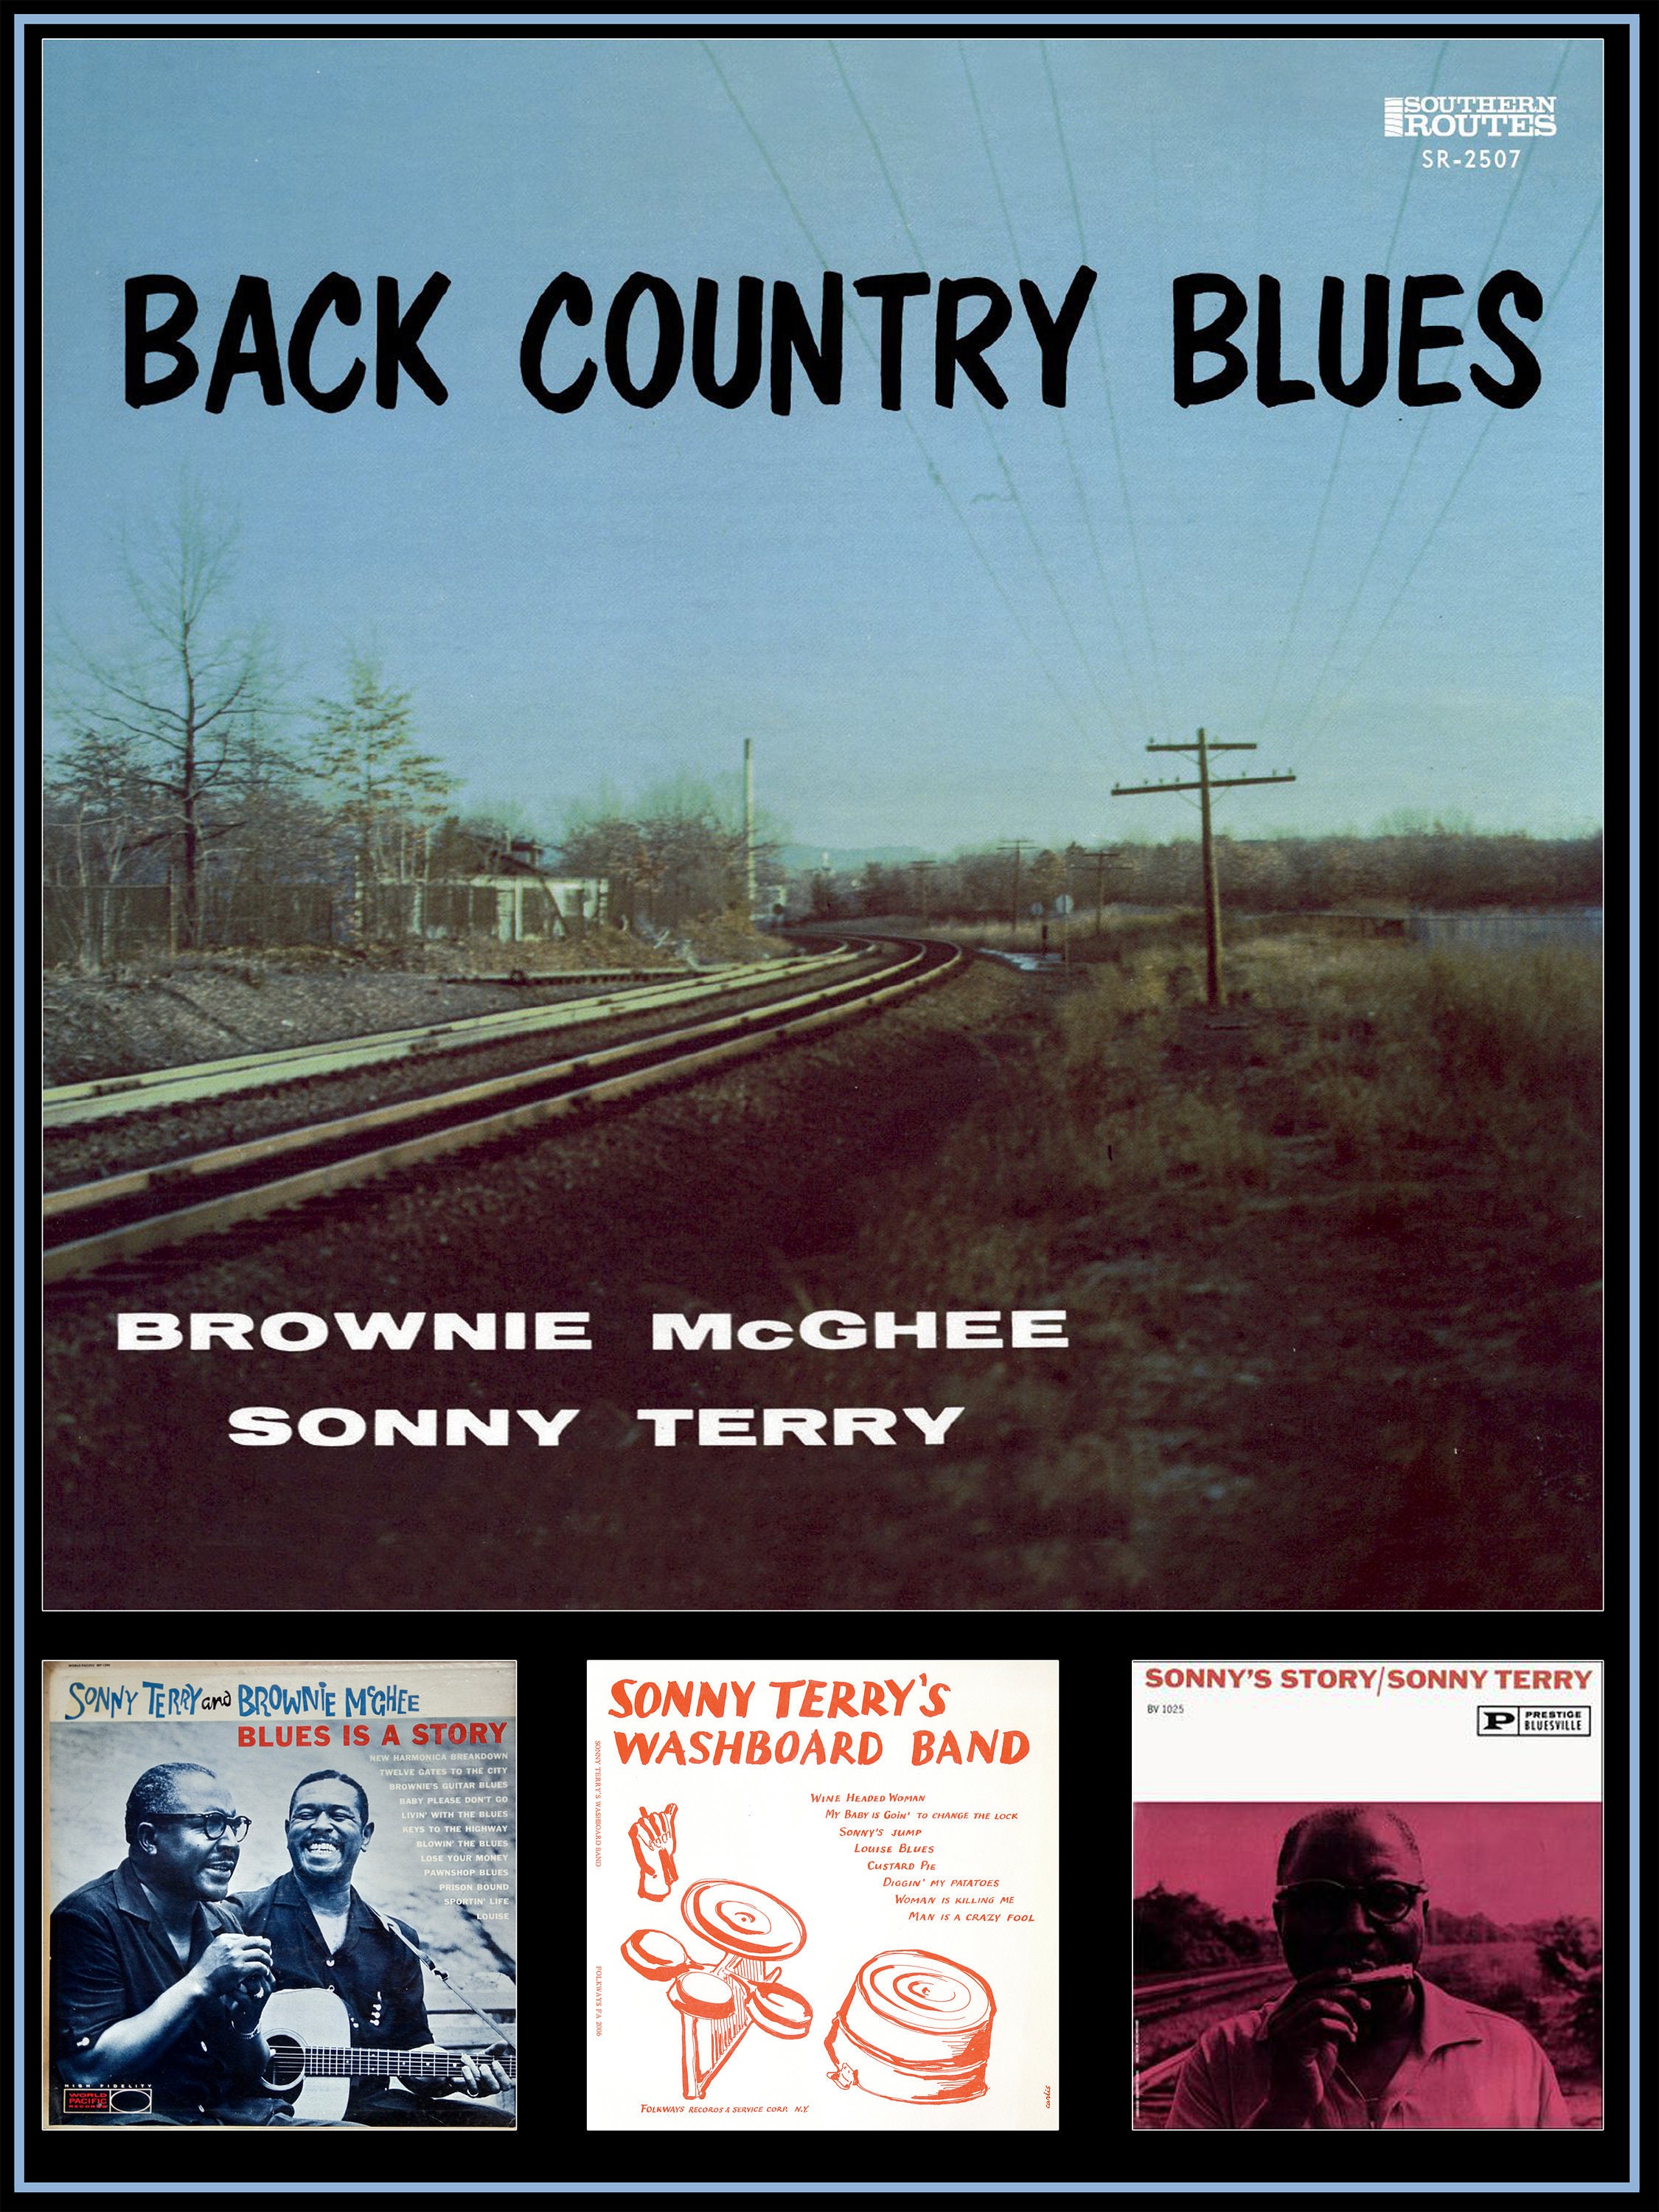 LP　Etsy　Brownie　Sonny　Poster　Blues　Back　Country　Terry　Mcghee